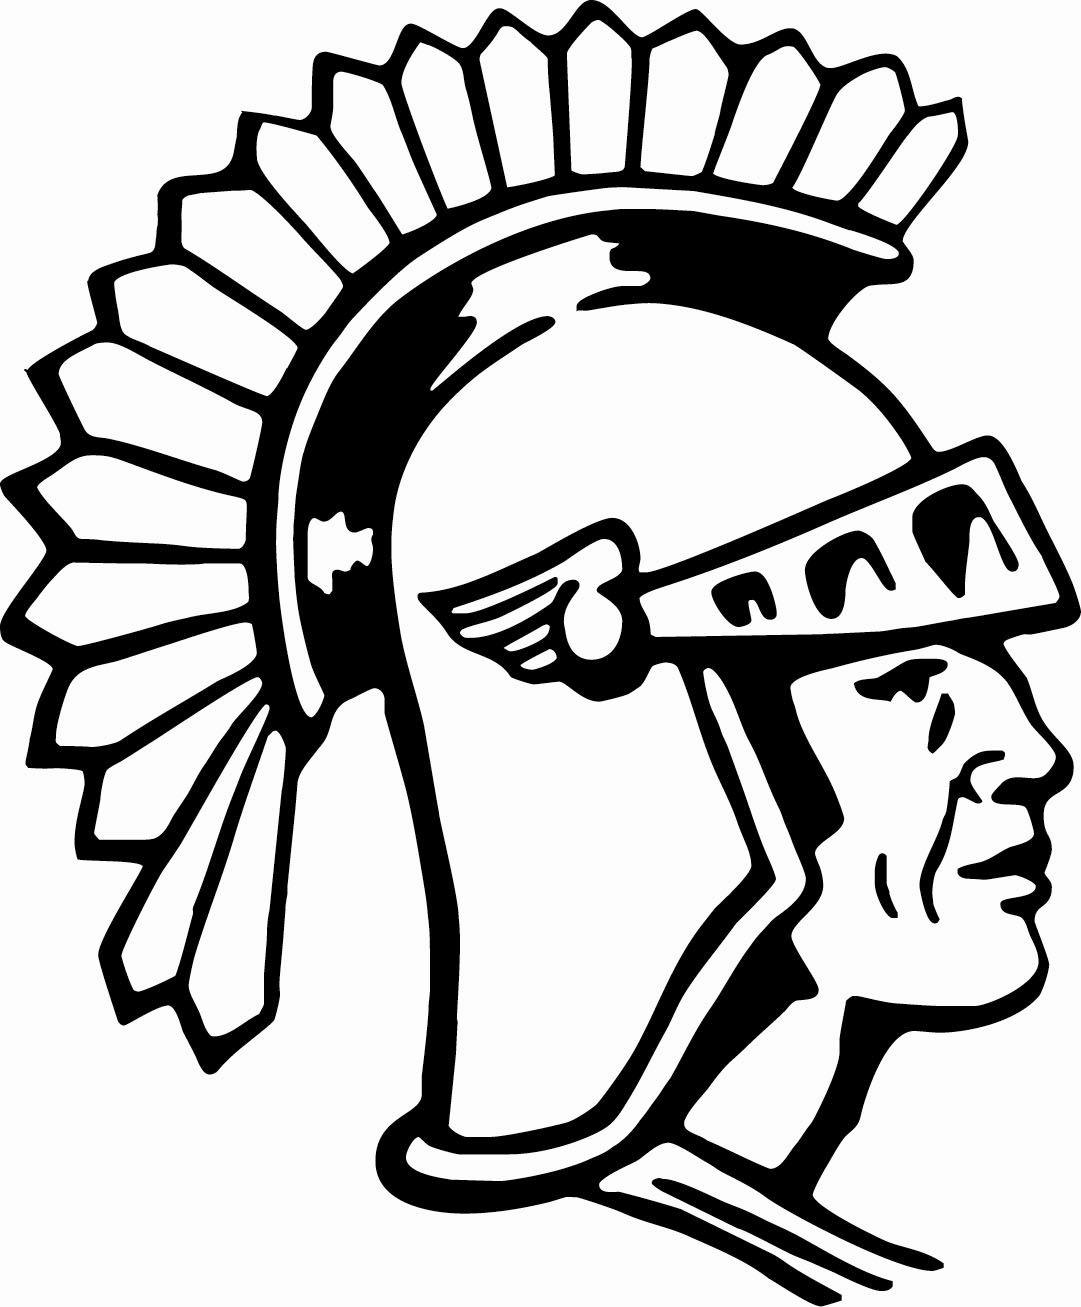 Black and White USC Logo - Free USC Cliparts, Download Free Clip Art, Free Clip Art on Clipart ...